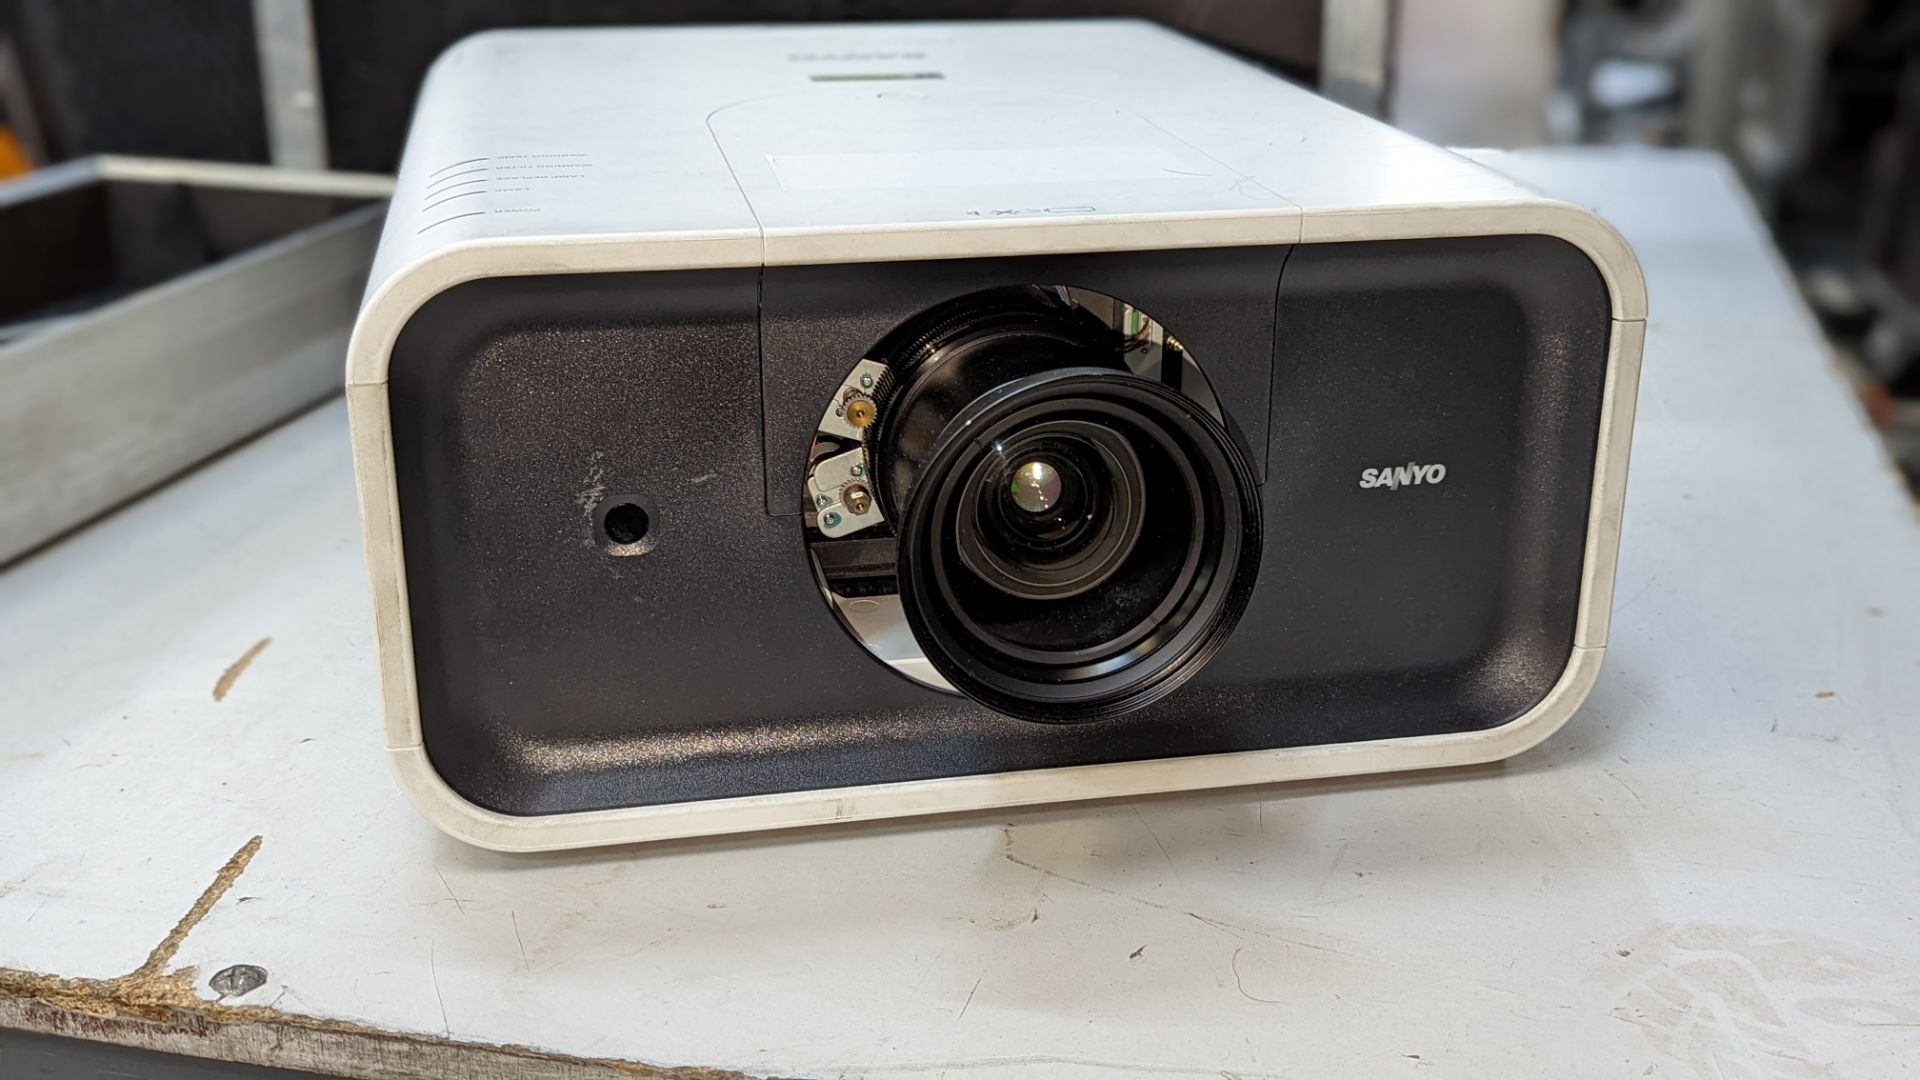 Sanyo PLC model XP-100 LCD projector fitted with LNS-31 lens. Includes remote & flight case - Image 3 of 10